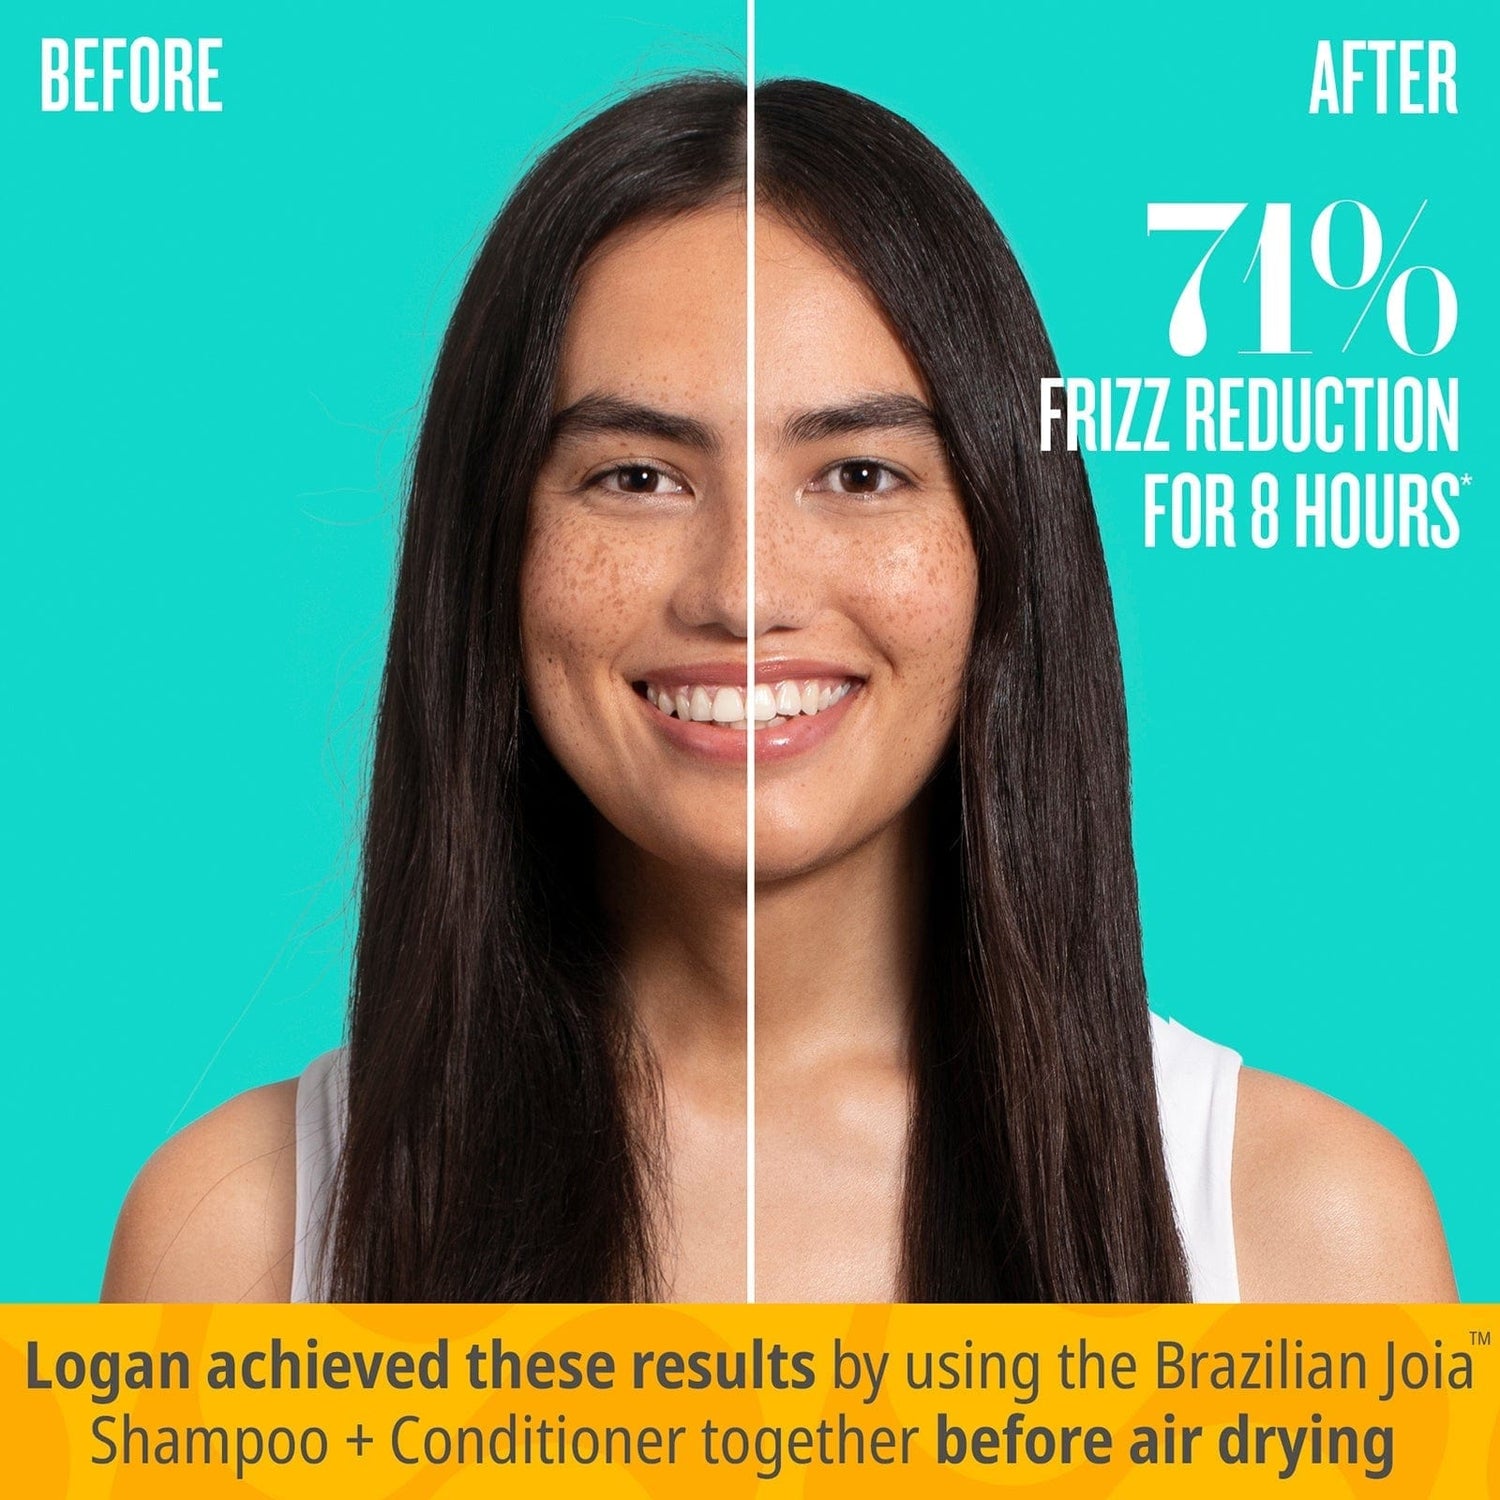 Before // After 71% frizz reduction for 8 hours* - Logan achieved these results by using the Brazilian Joia Shampoo + Conditioner together before air drying